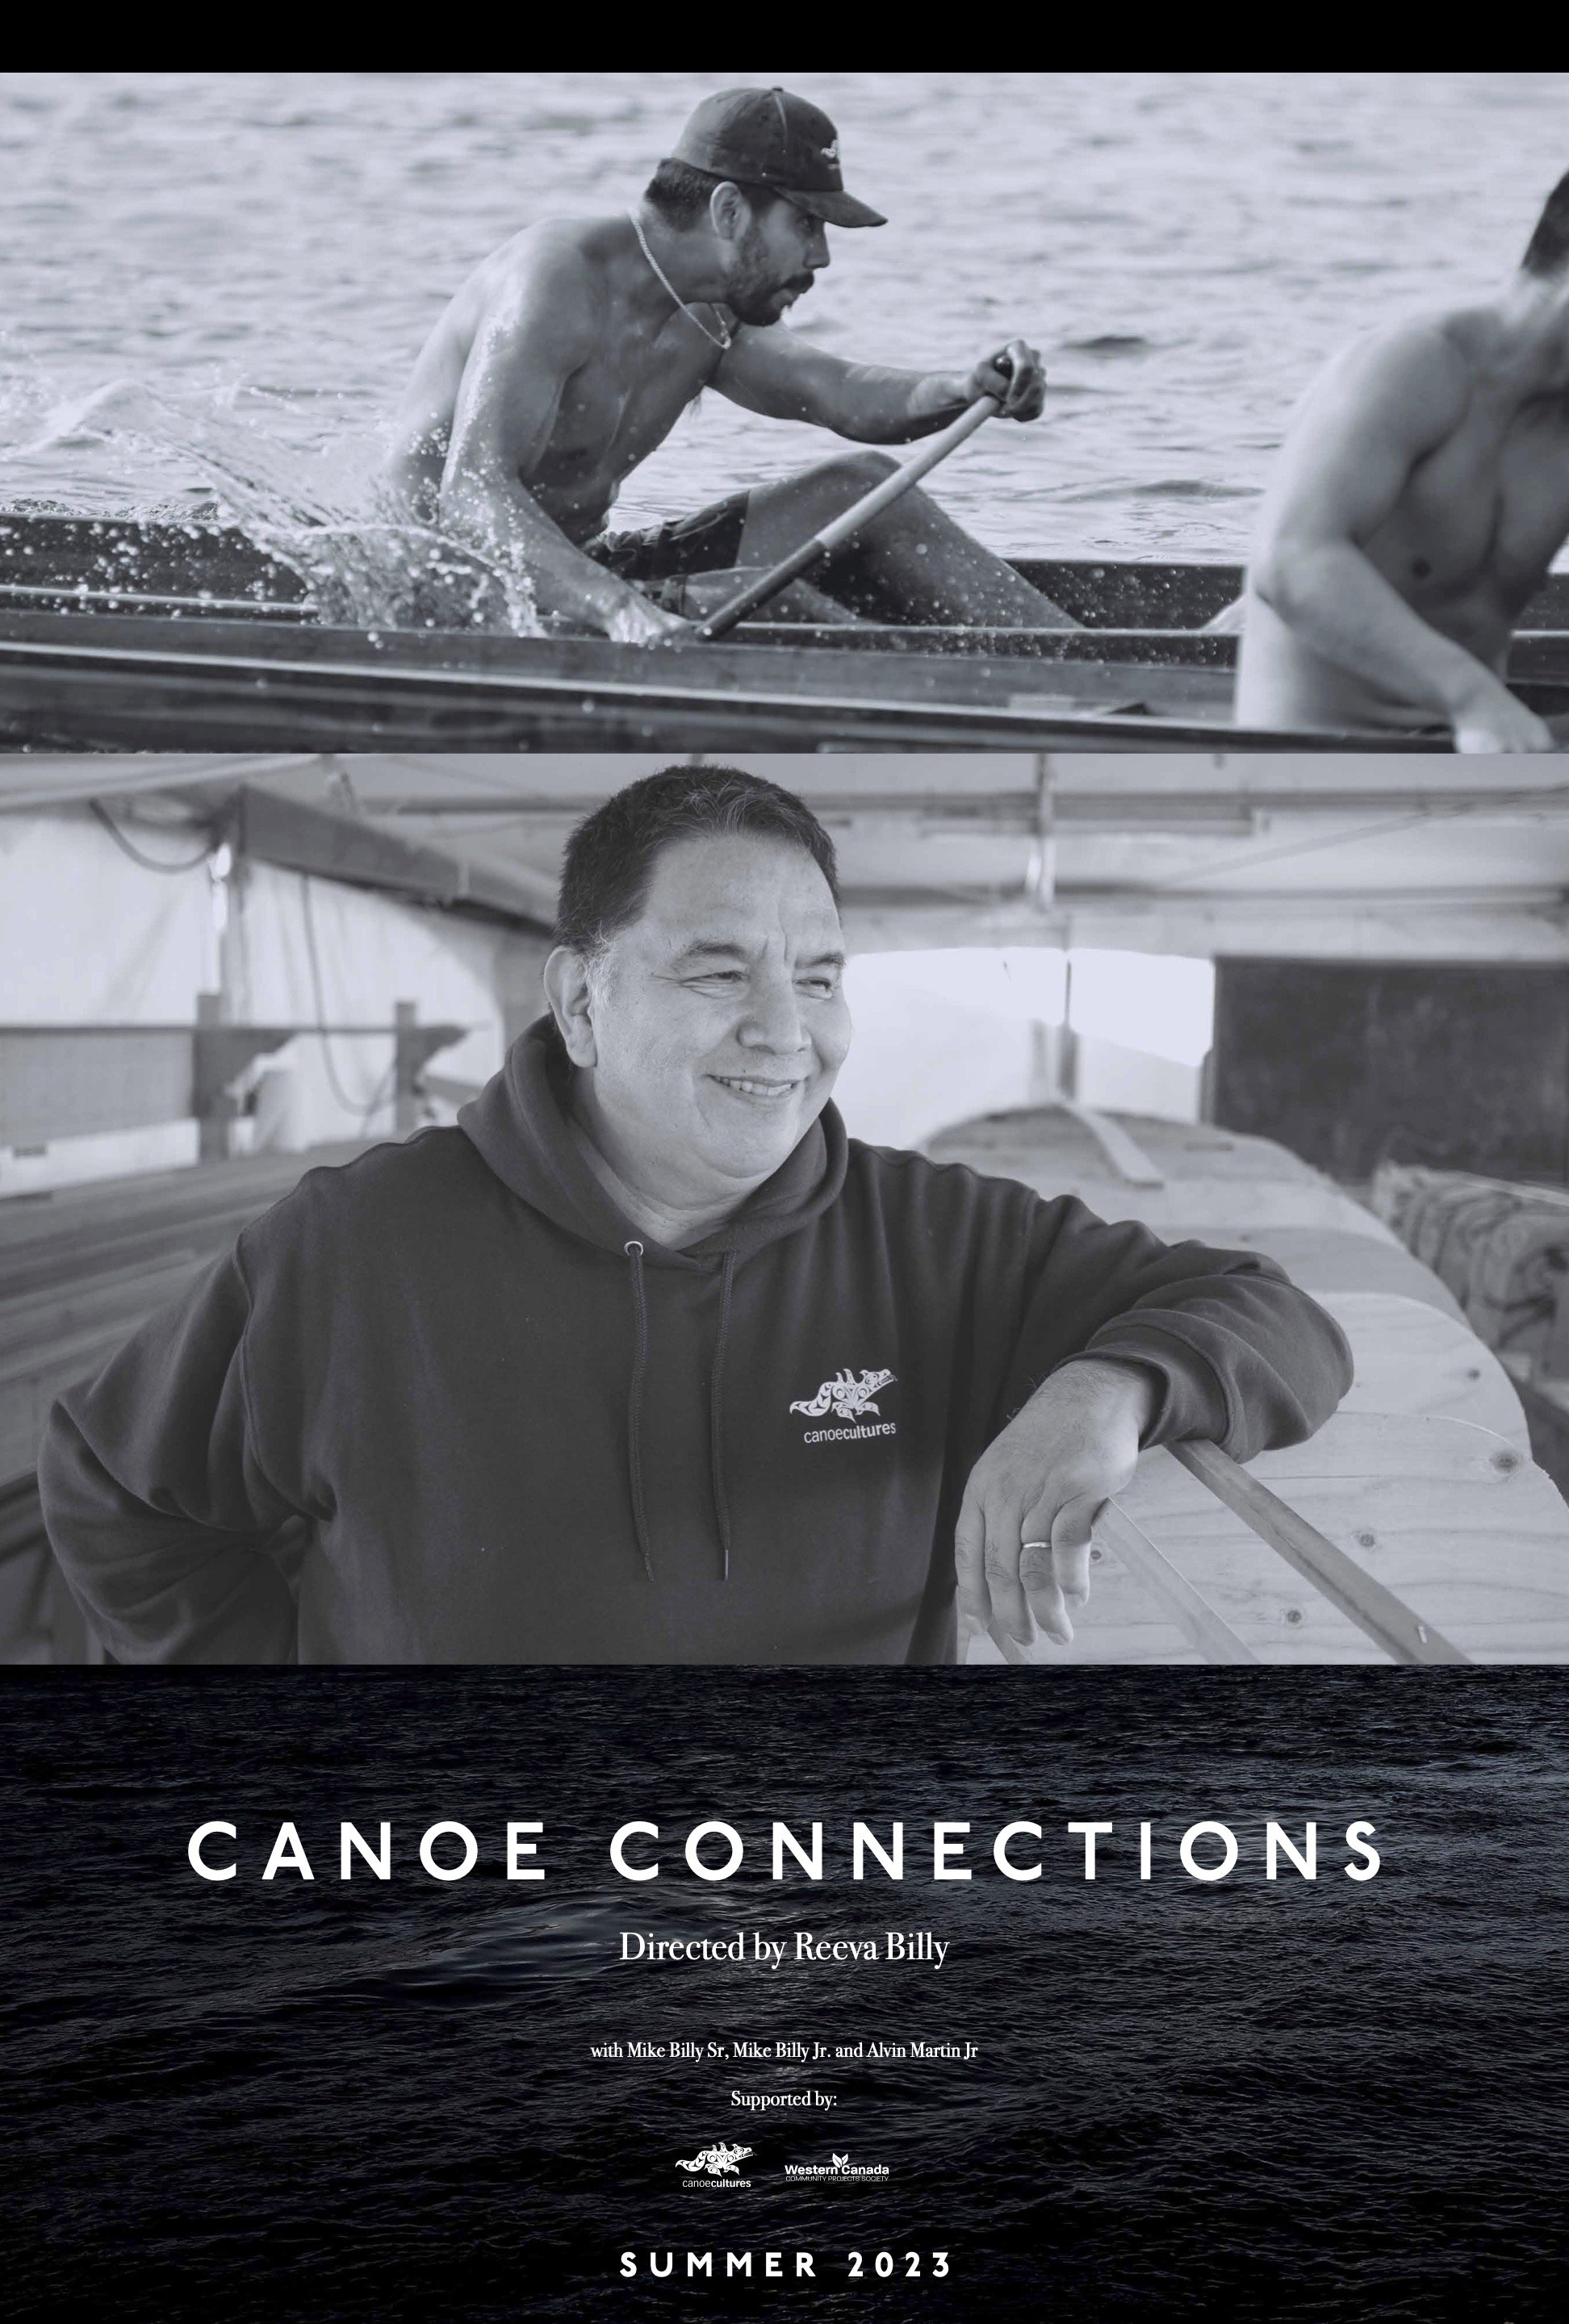 CanoeConnectionsPoster-web-2.jpg